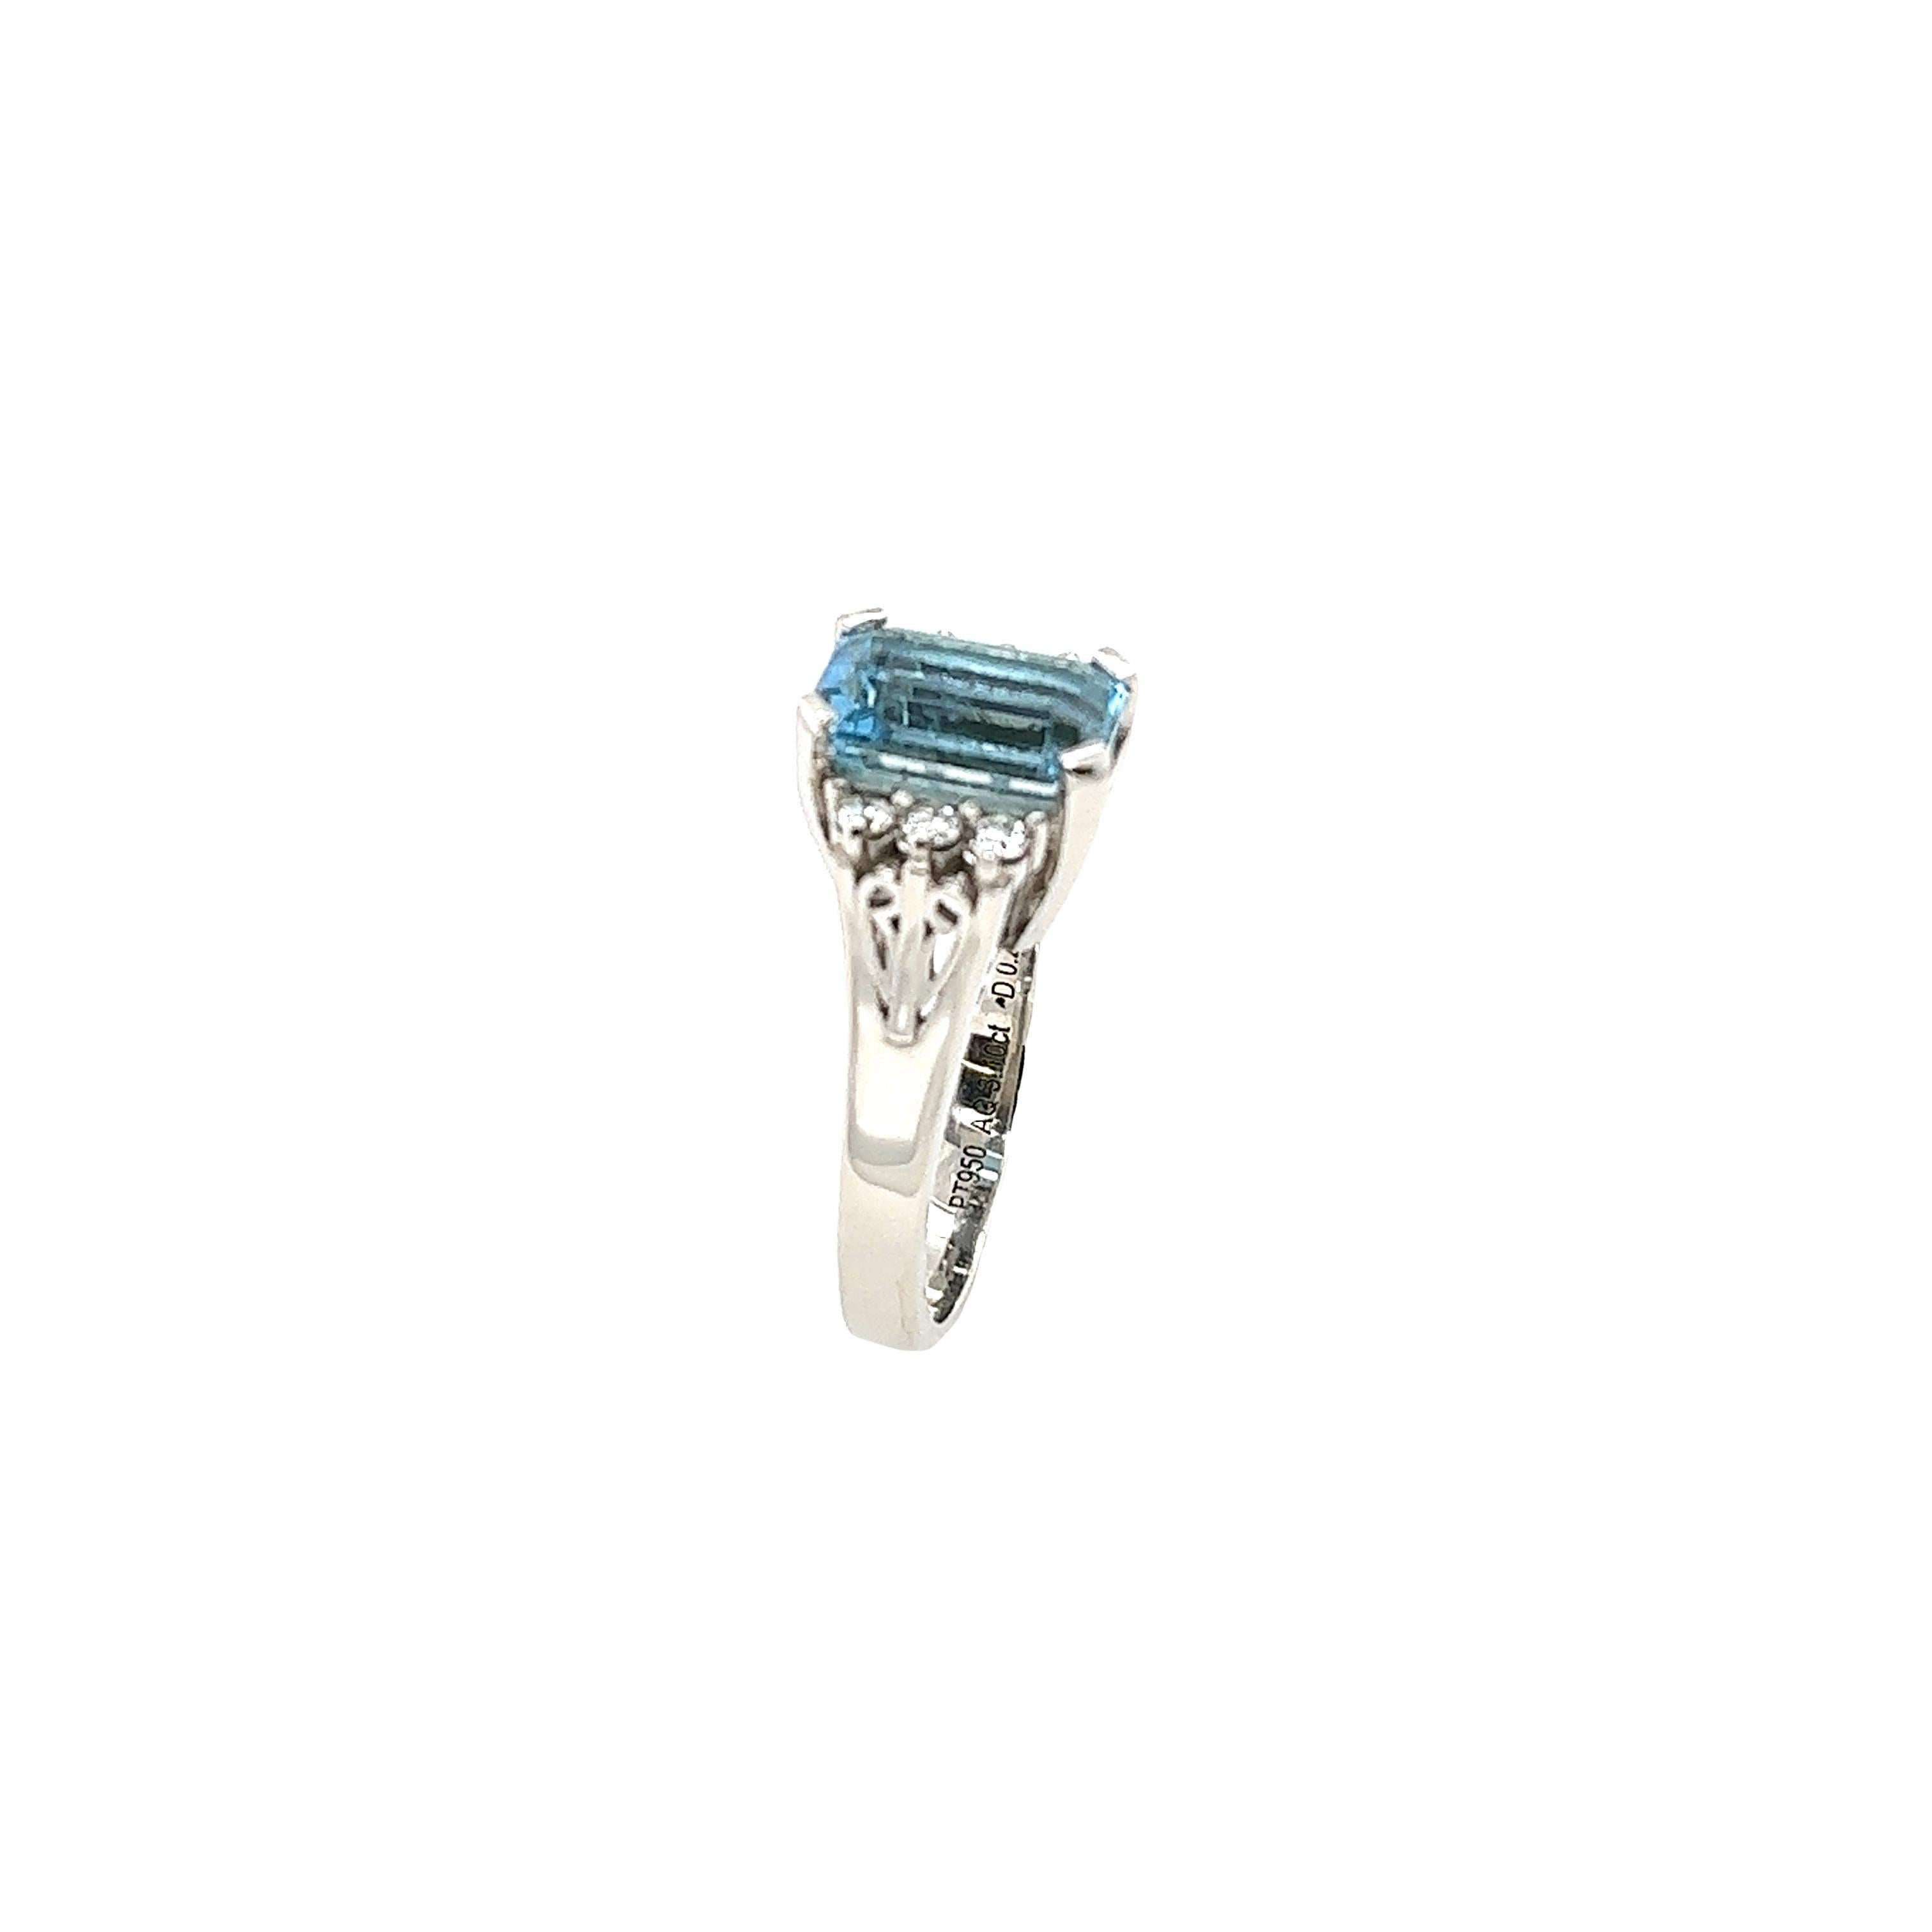 Triple AAA Emerald Cut 3.10ct Aquamarine Ring w/ 3 Diamonds on Sides in Platinum In New Condition For Sale In London, GB